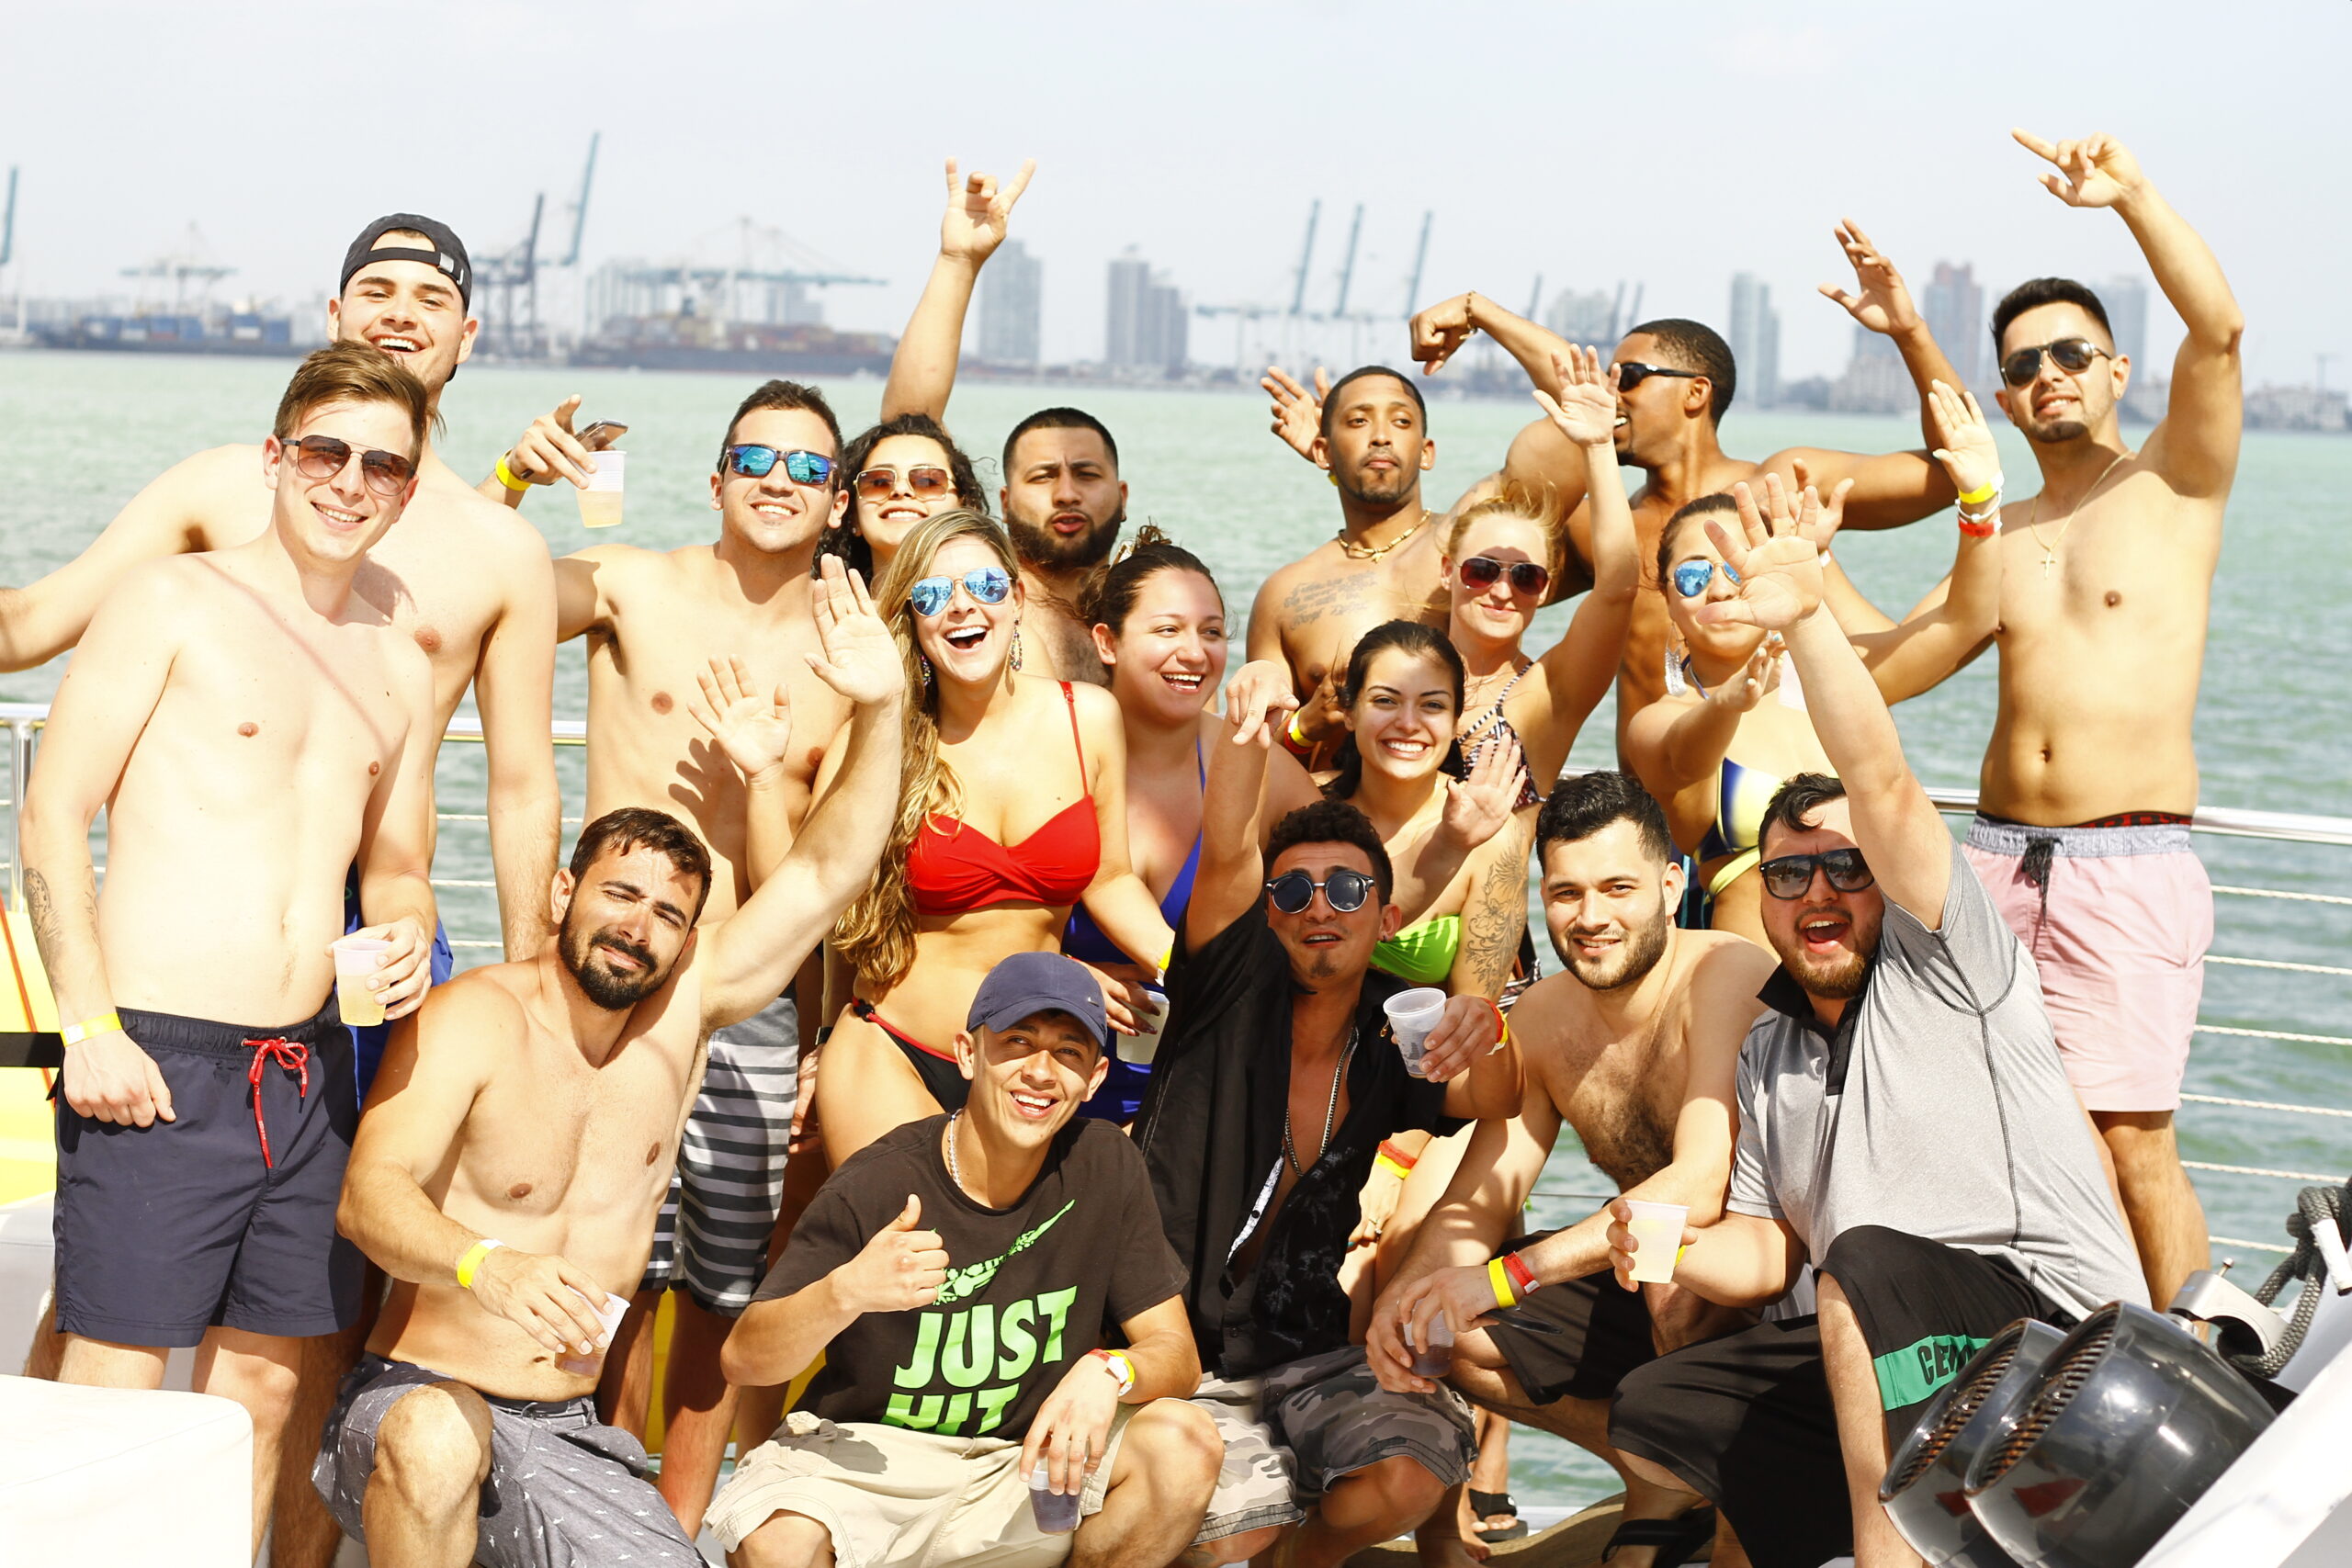 Group of People enjoying the Boat Party